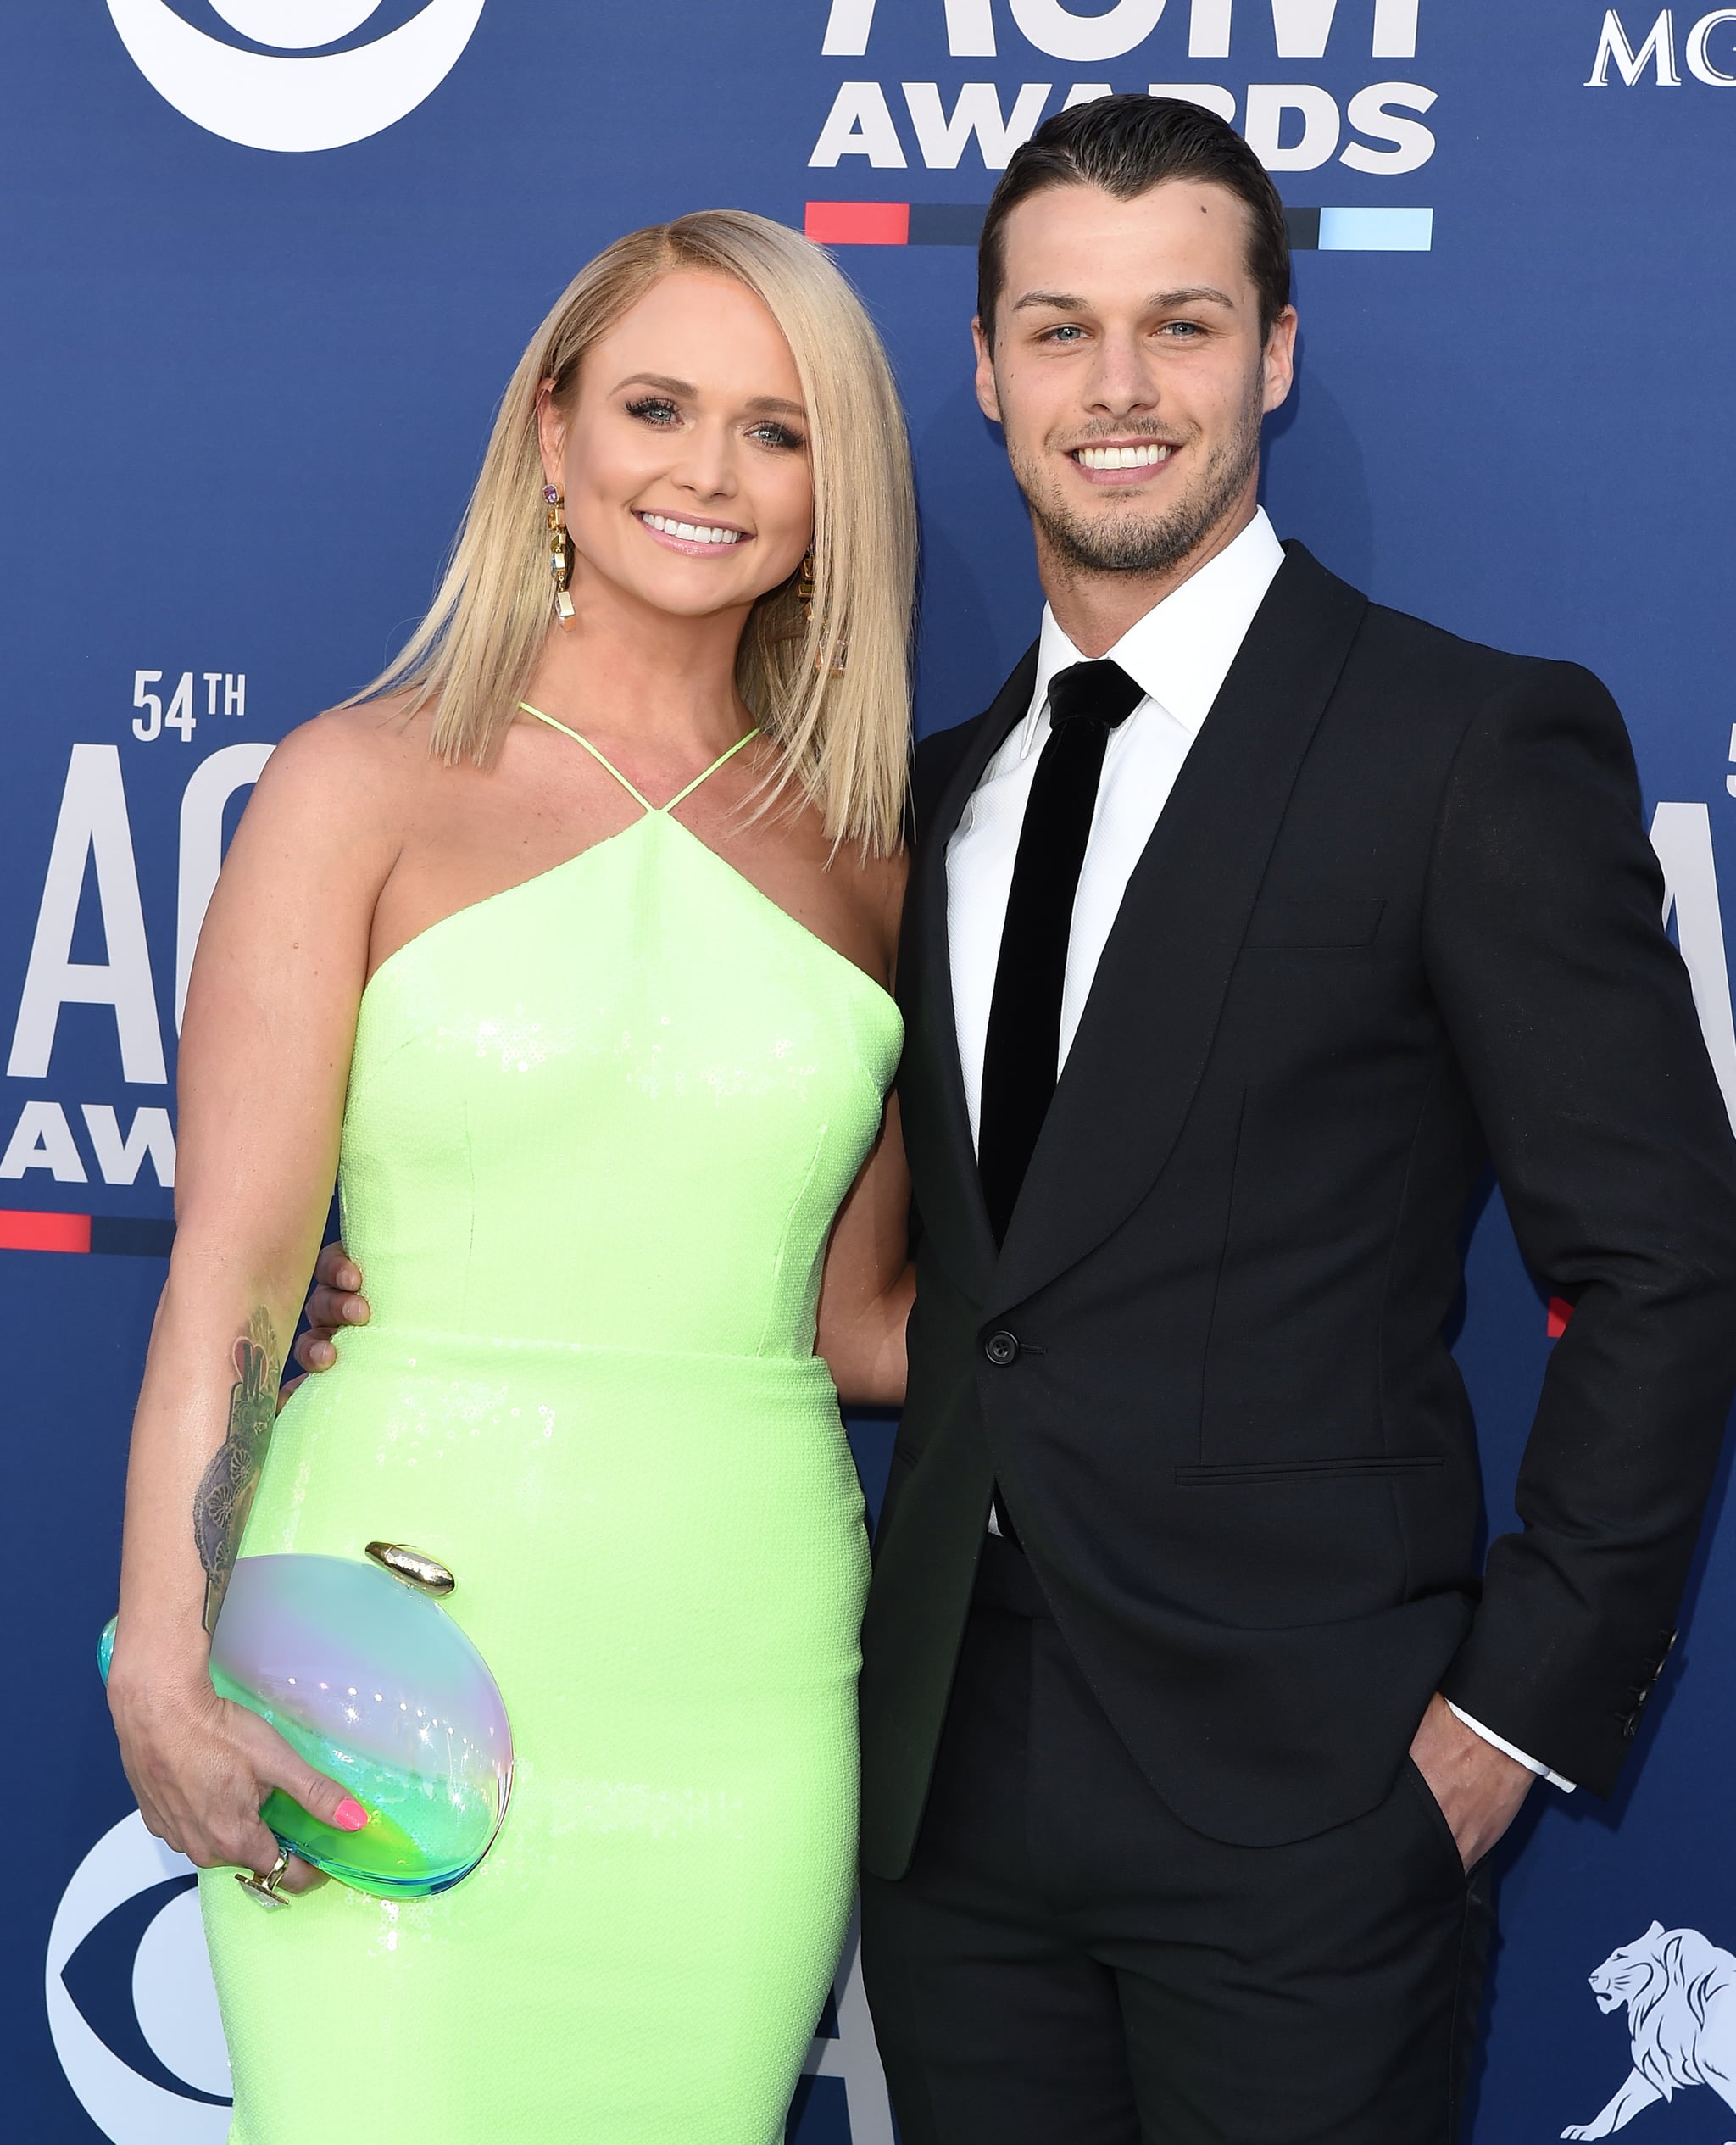 LAS VEGAS, NEVADA - APRIL 07: Miranda Lambert and Brendan McLoughlin attend the 54th Academy of Country Music Awards at MGM Grand Garden Arena on April 07, 2019 in Las Vegas, Nevada. (Photo by Axelle/Bauer-Griffin/FilmMagic)